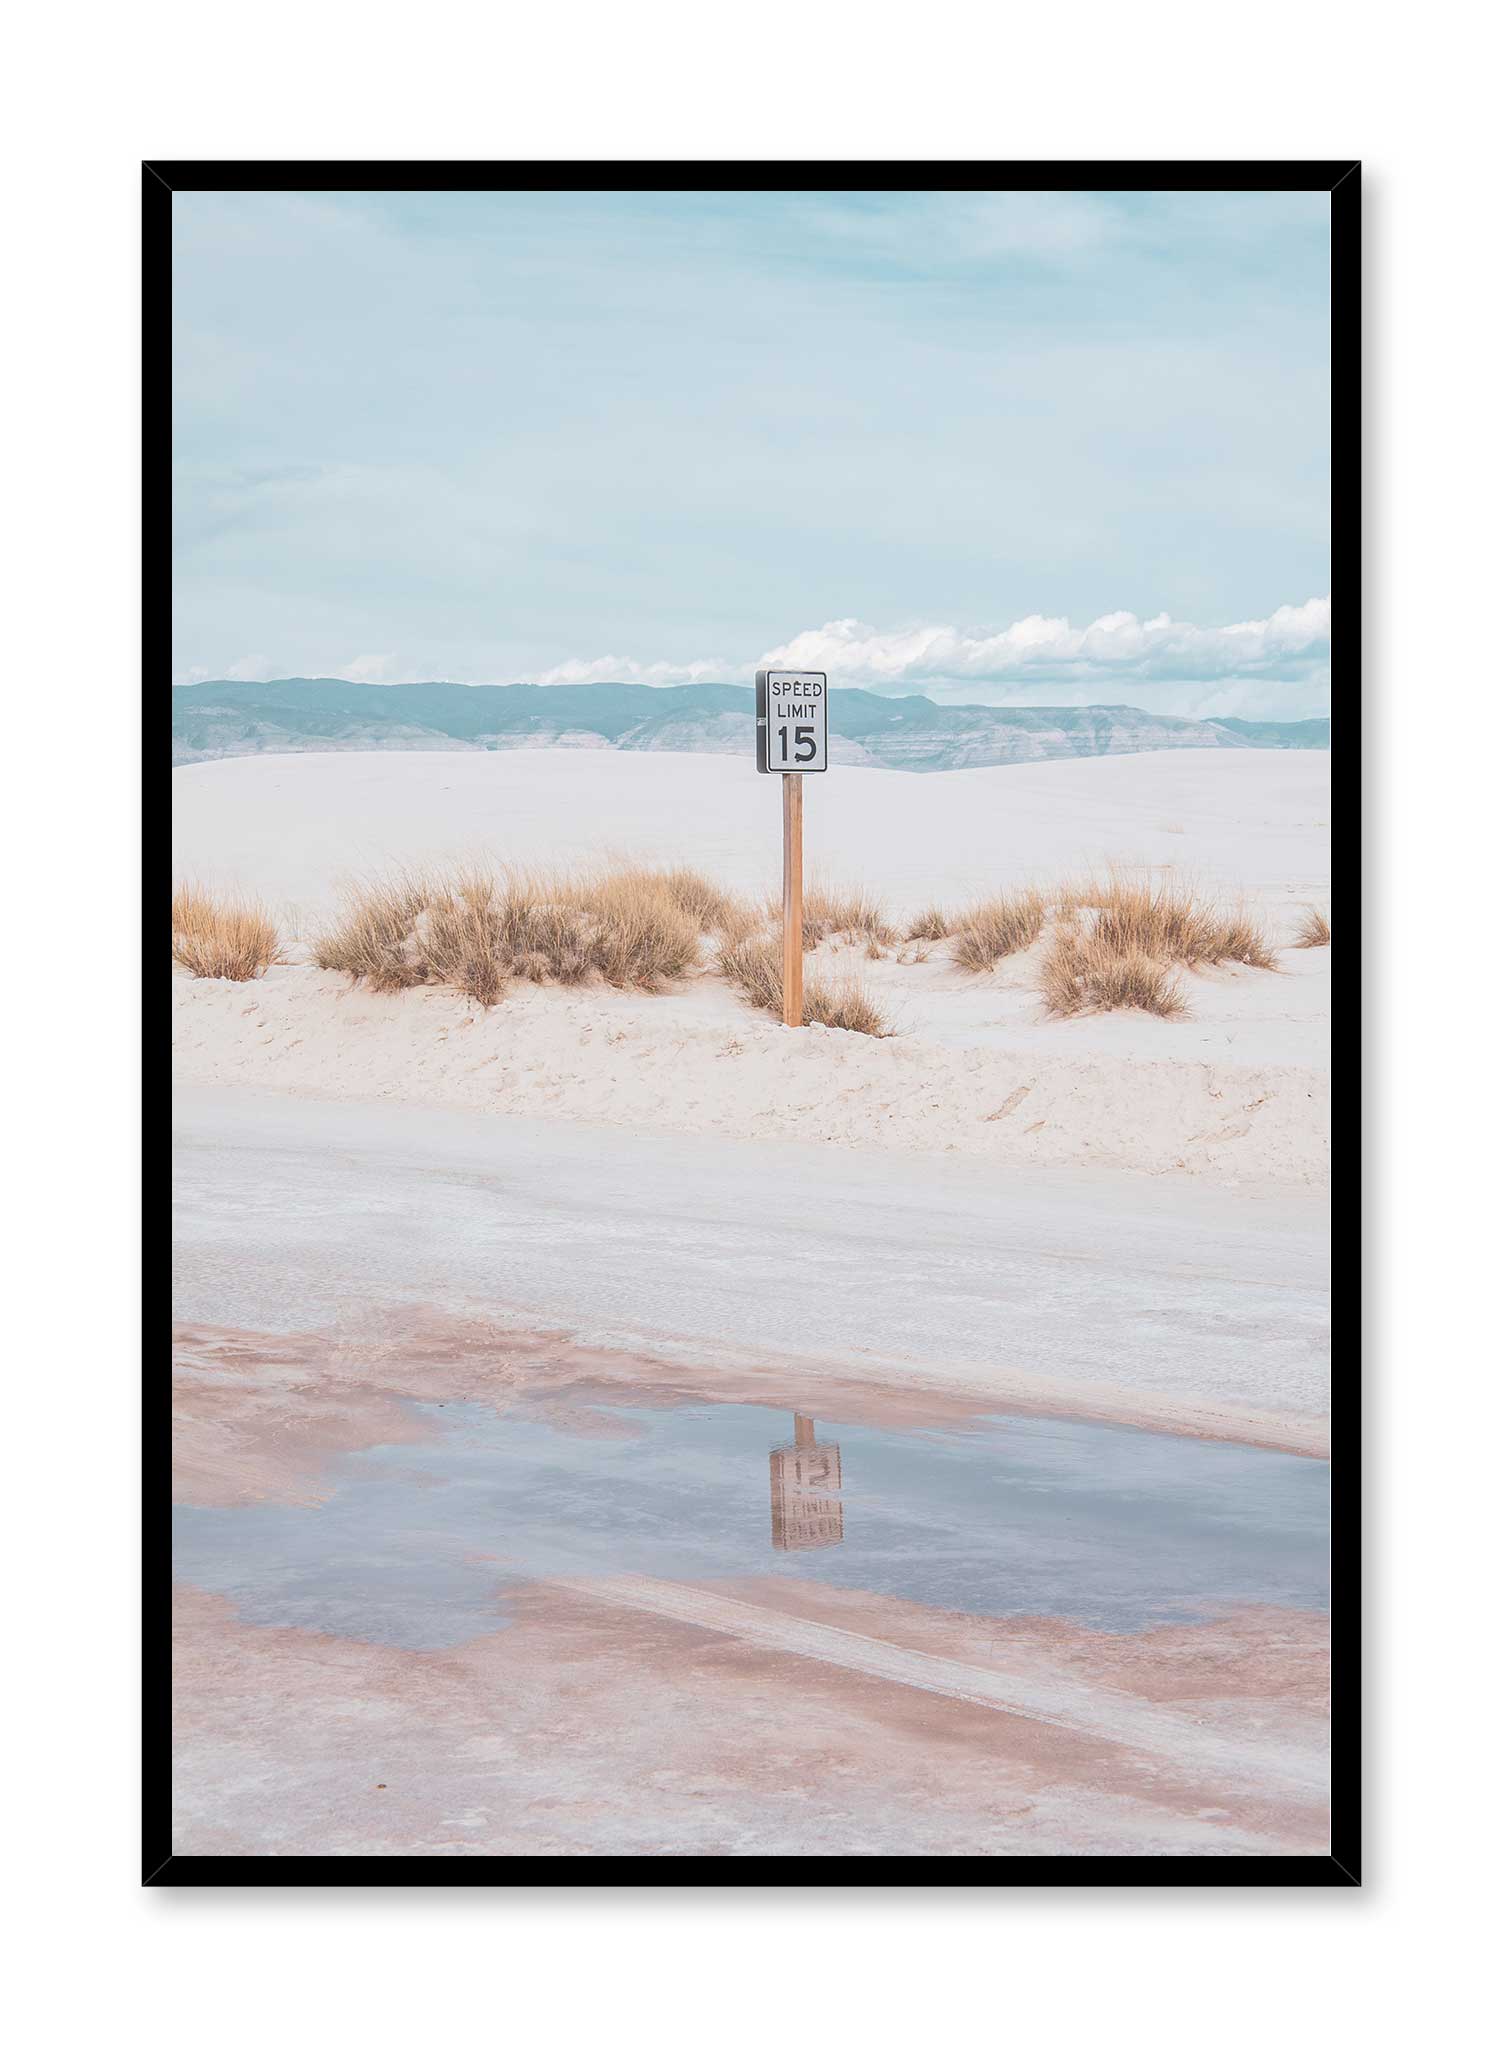 Mirage is a landscape photography poster of a desert road and a sandy horizon by Opposite Wall.